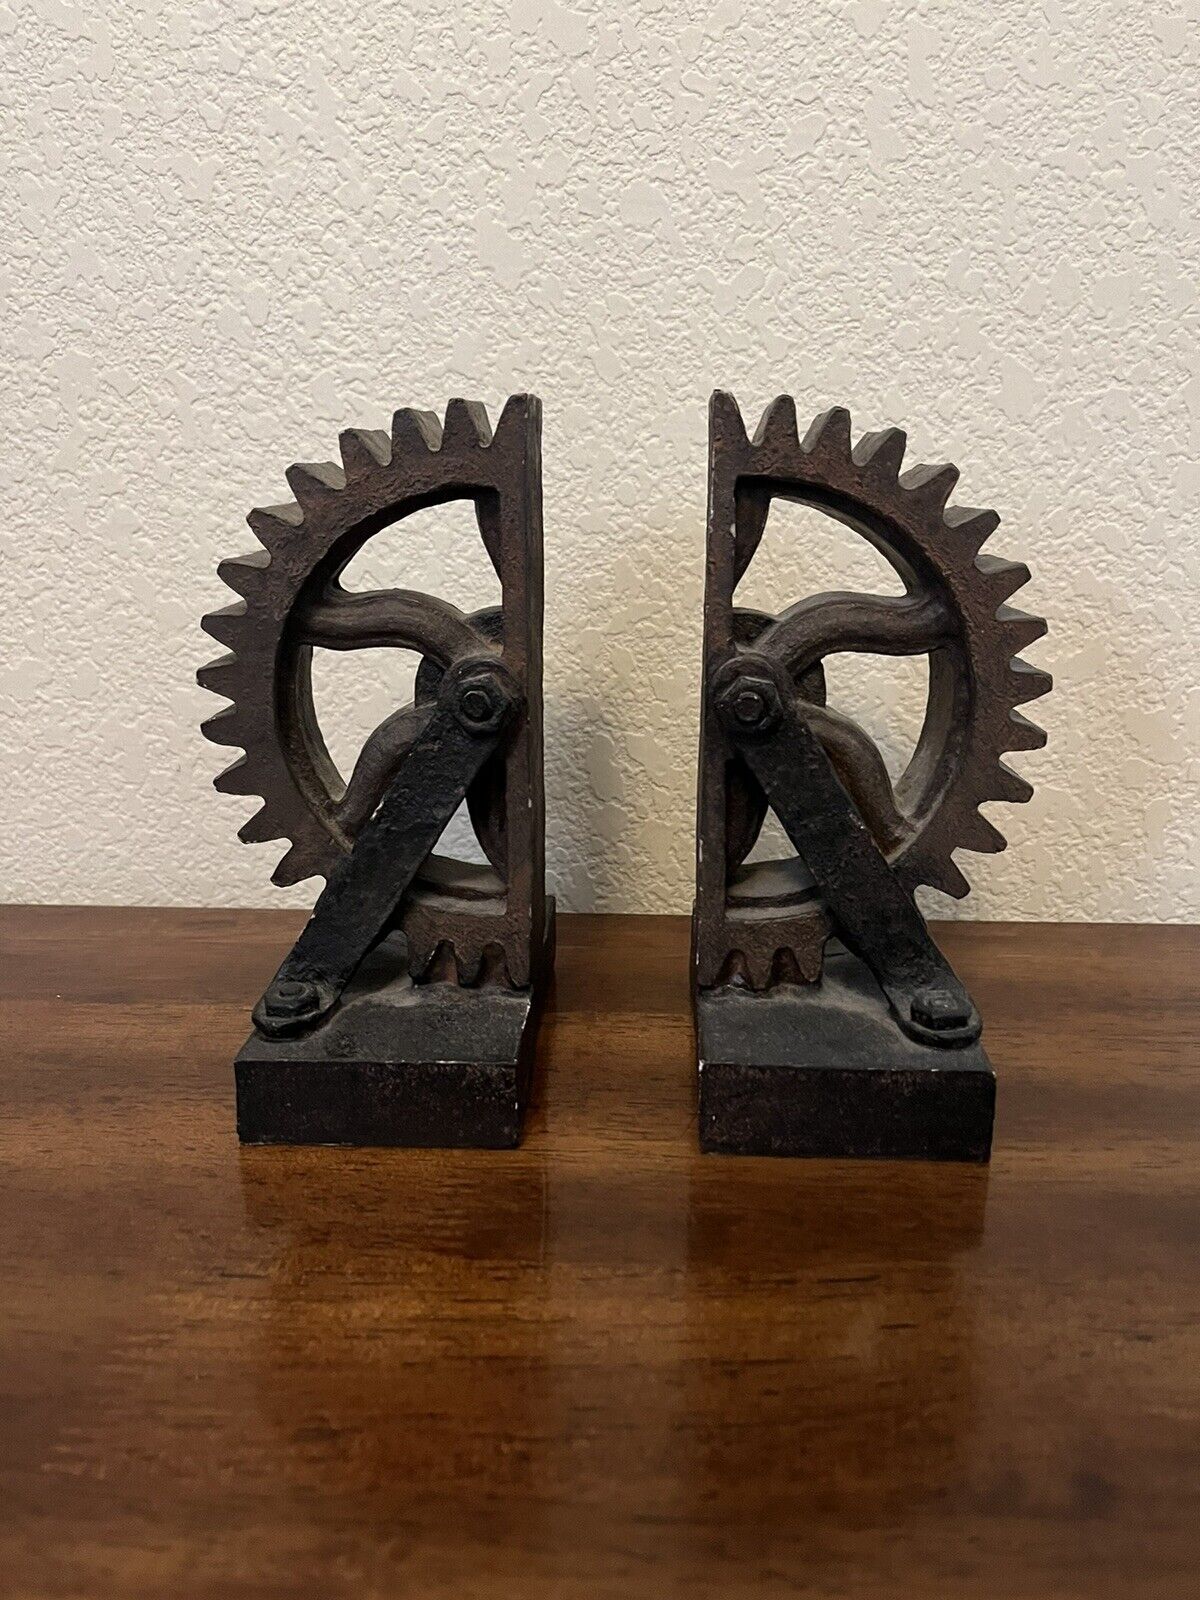 Rustic Wheel Gear Bookends Solid Resin, Brown/ Black 7” Tall